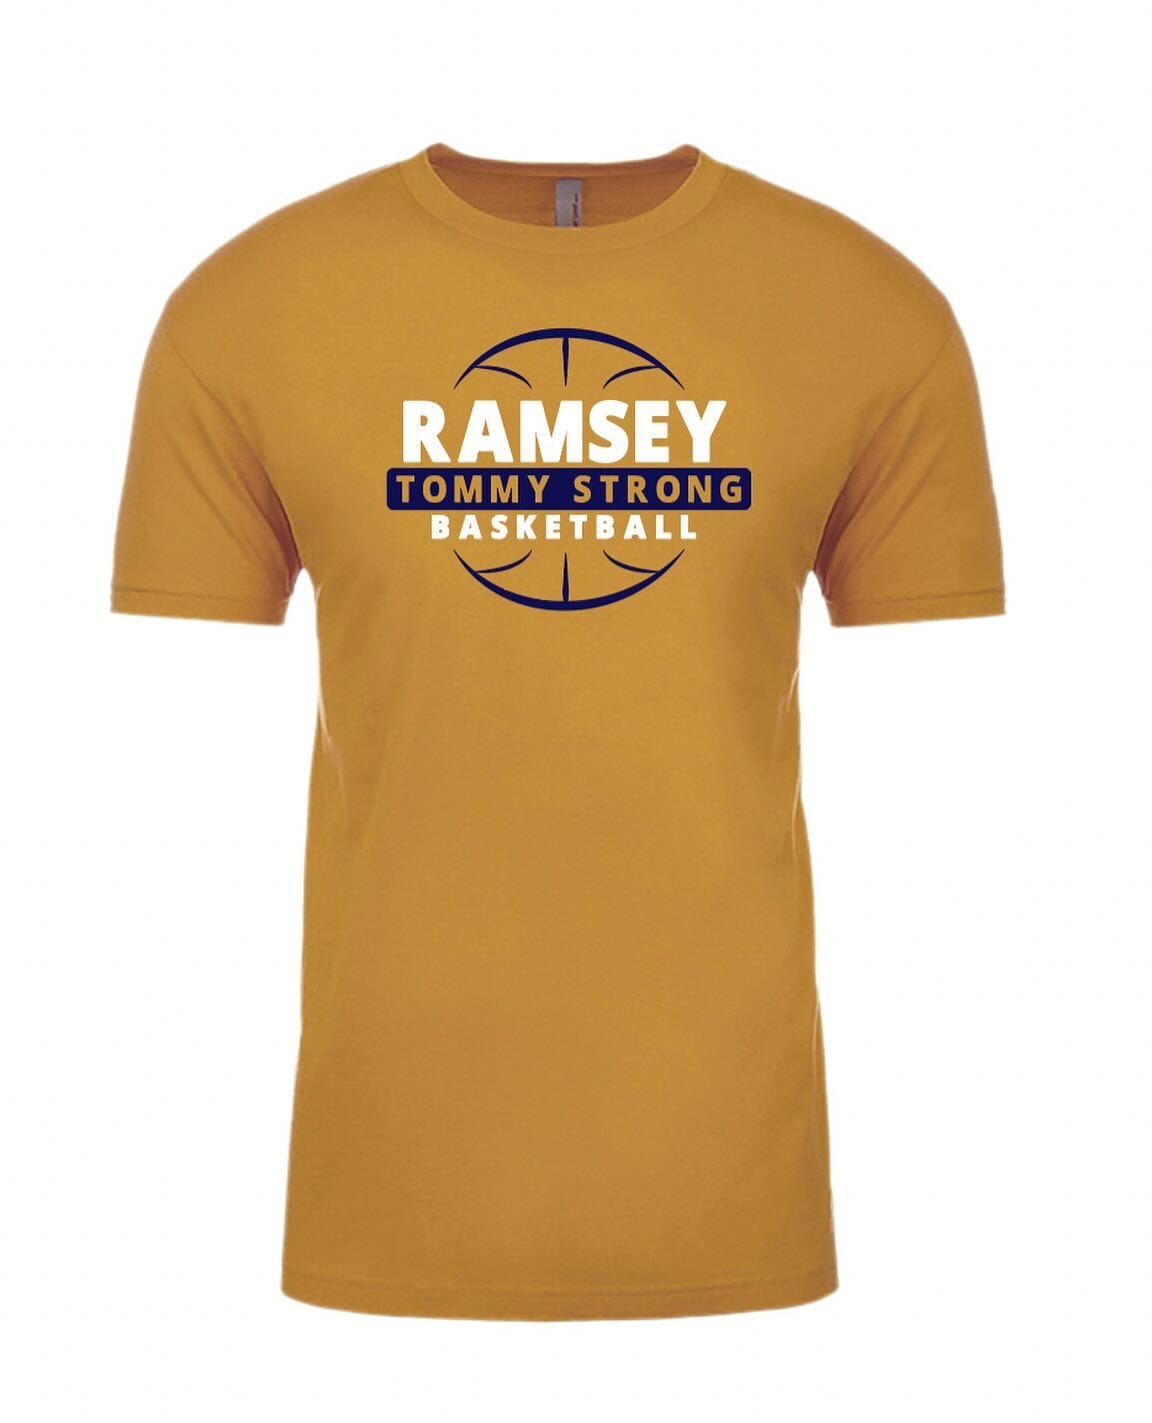 🎗️🏀 Ramsey basketball fans, get ready to GO GOLD for Tommy Strong game day on February 10th! 🏀🎗️

Pre-order your GOLD team tee in our shop (link in profile) through Jan 29th. Tees will be available for pickup on the 9th or at the game. Available 